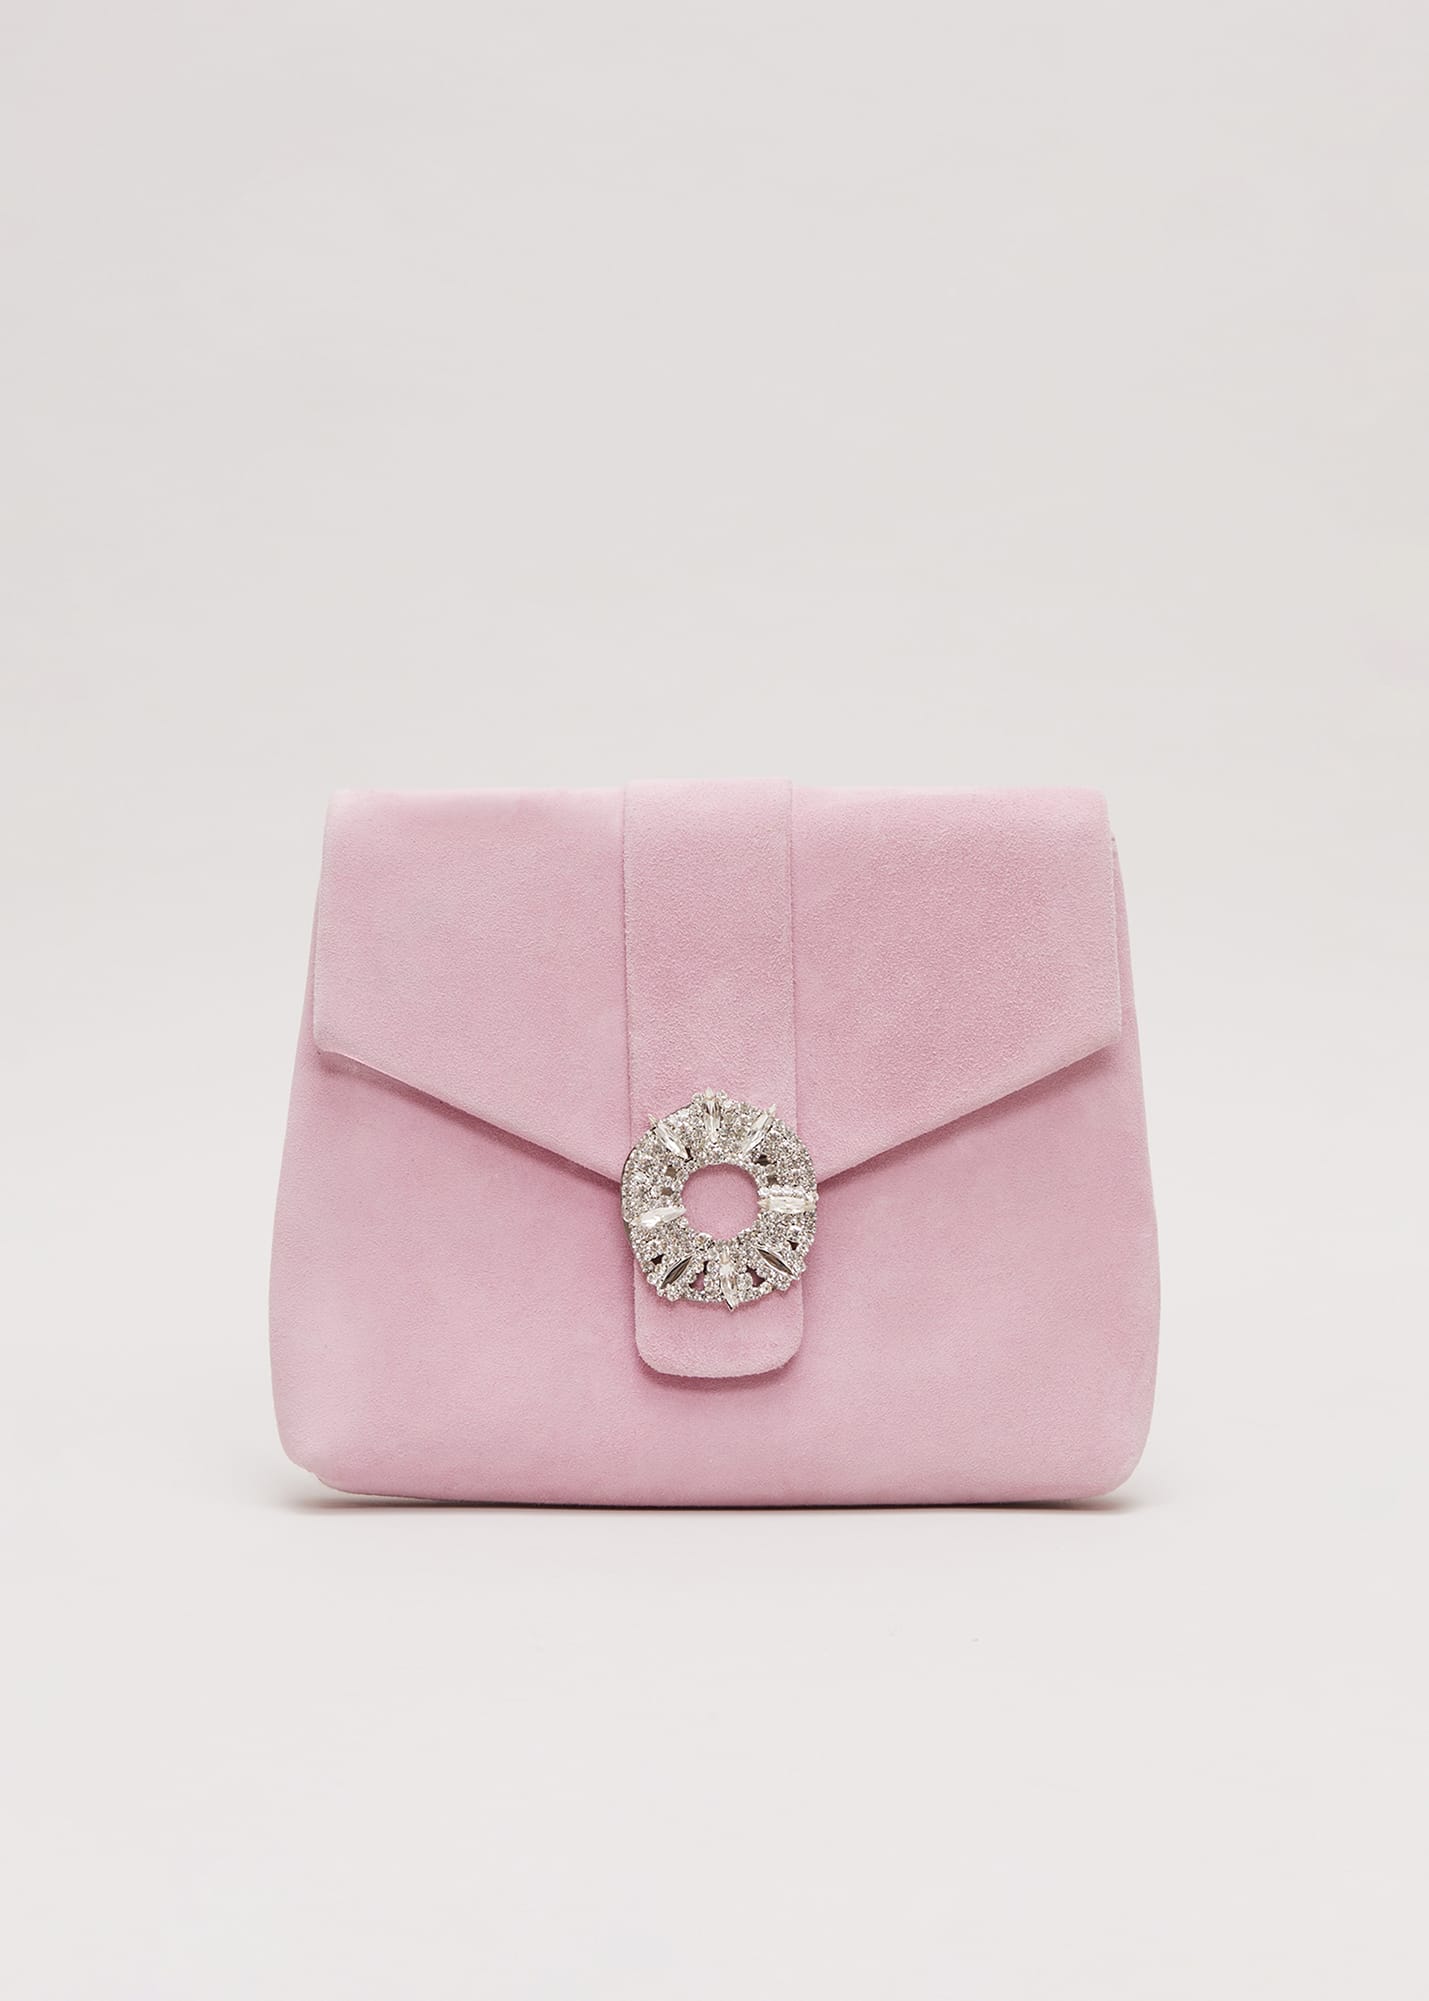 Phase Eight Women's Embellished Clutch Bag